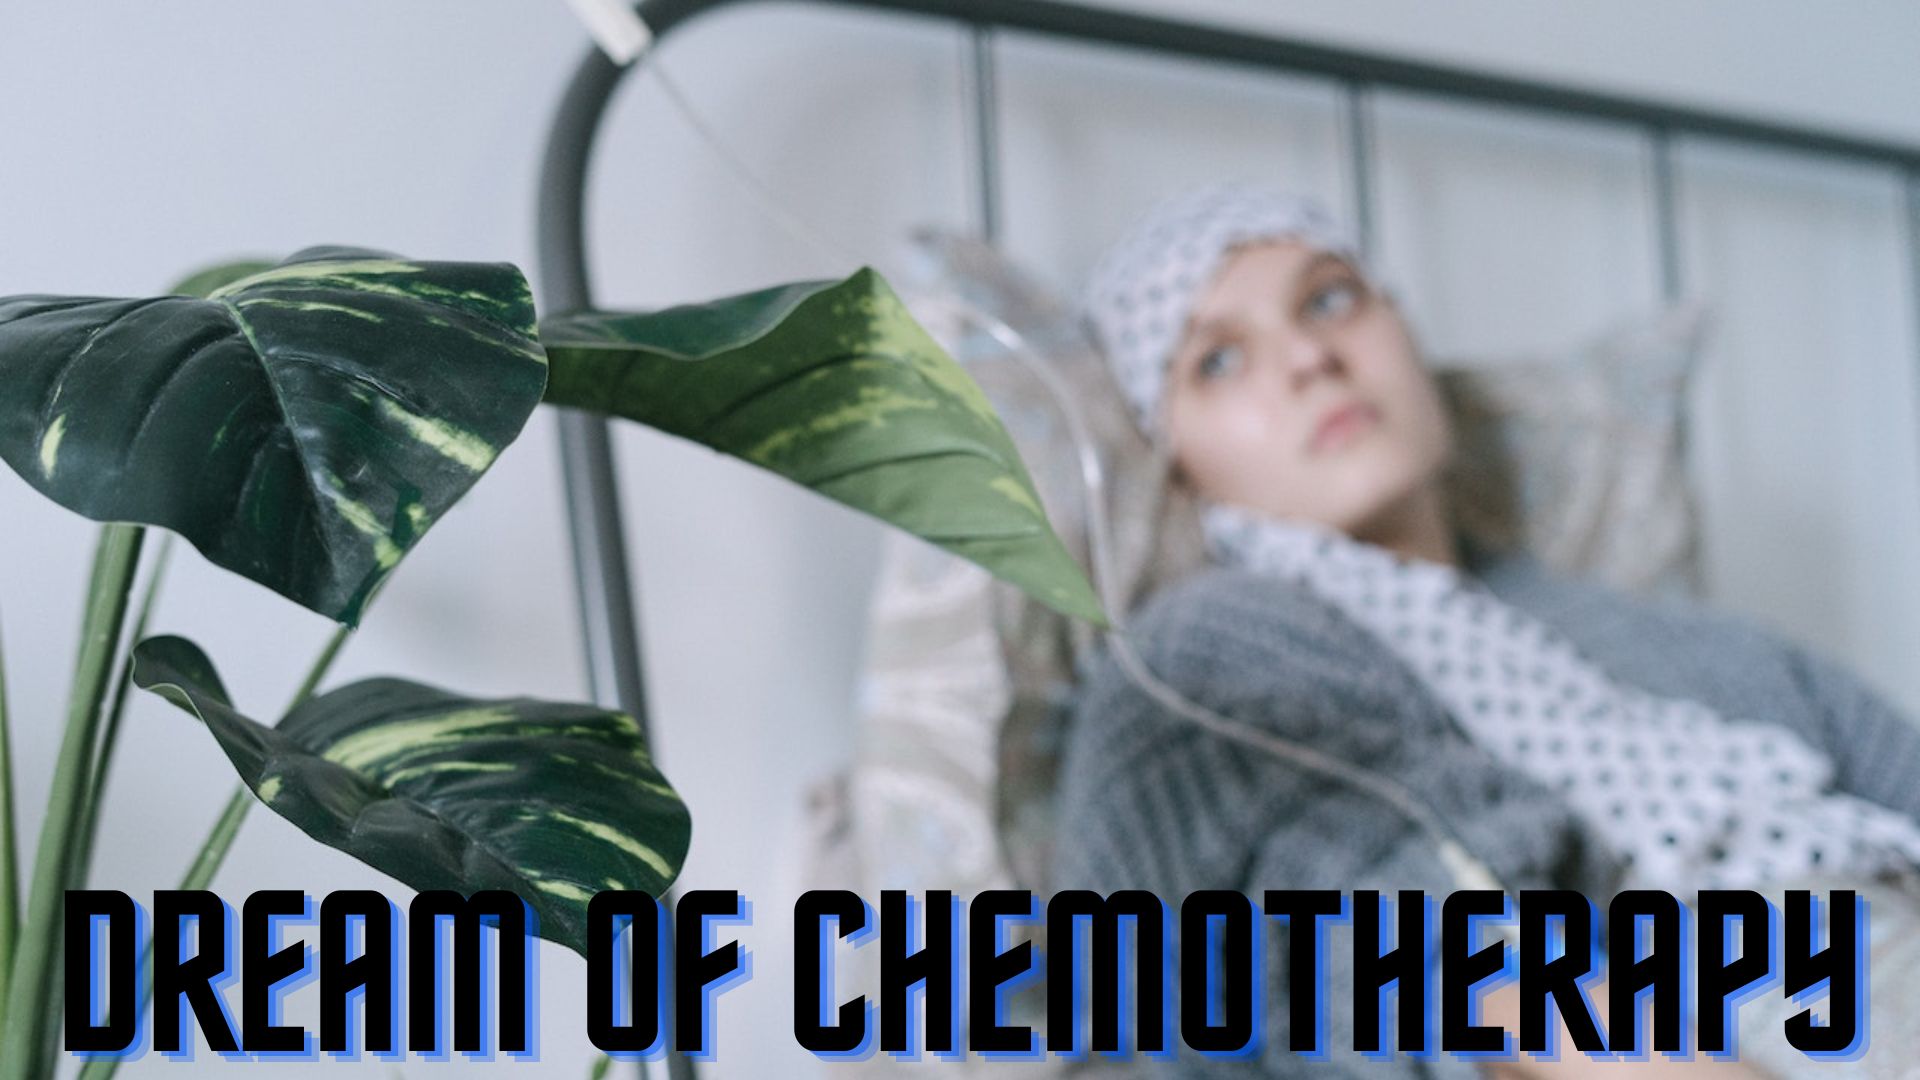 Dream Of Chemotherapy - Poor Handling Of Personal Matters